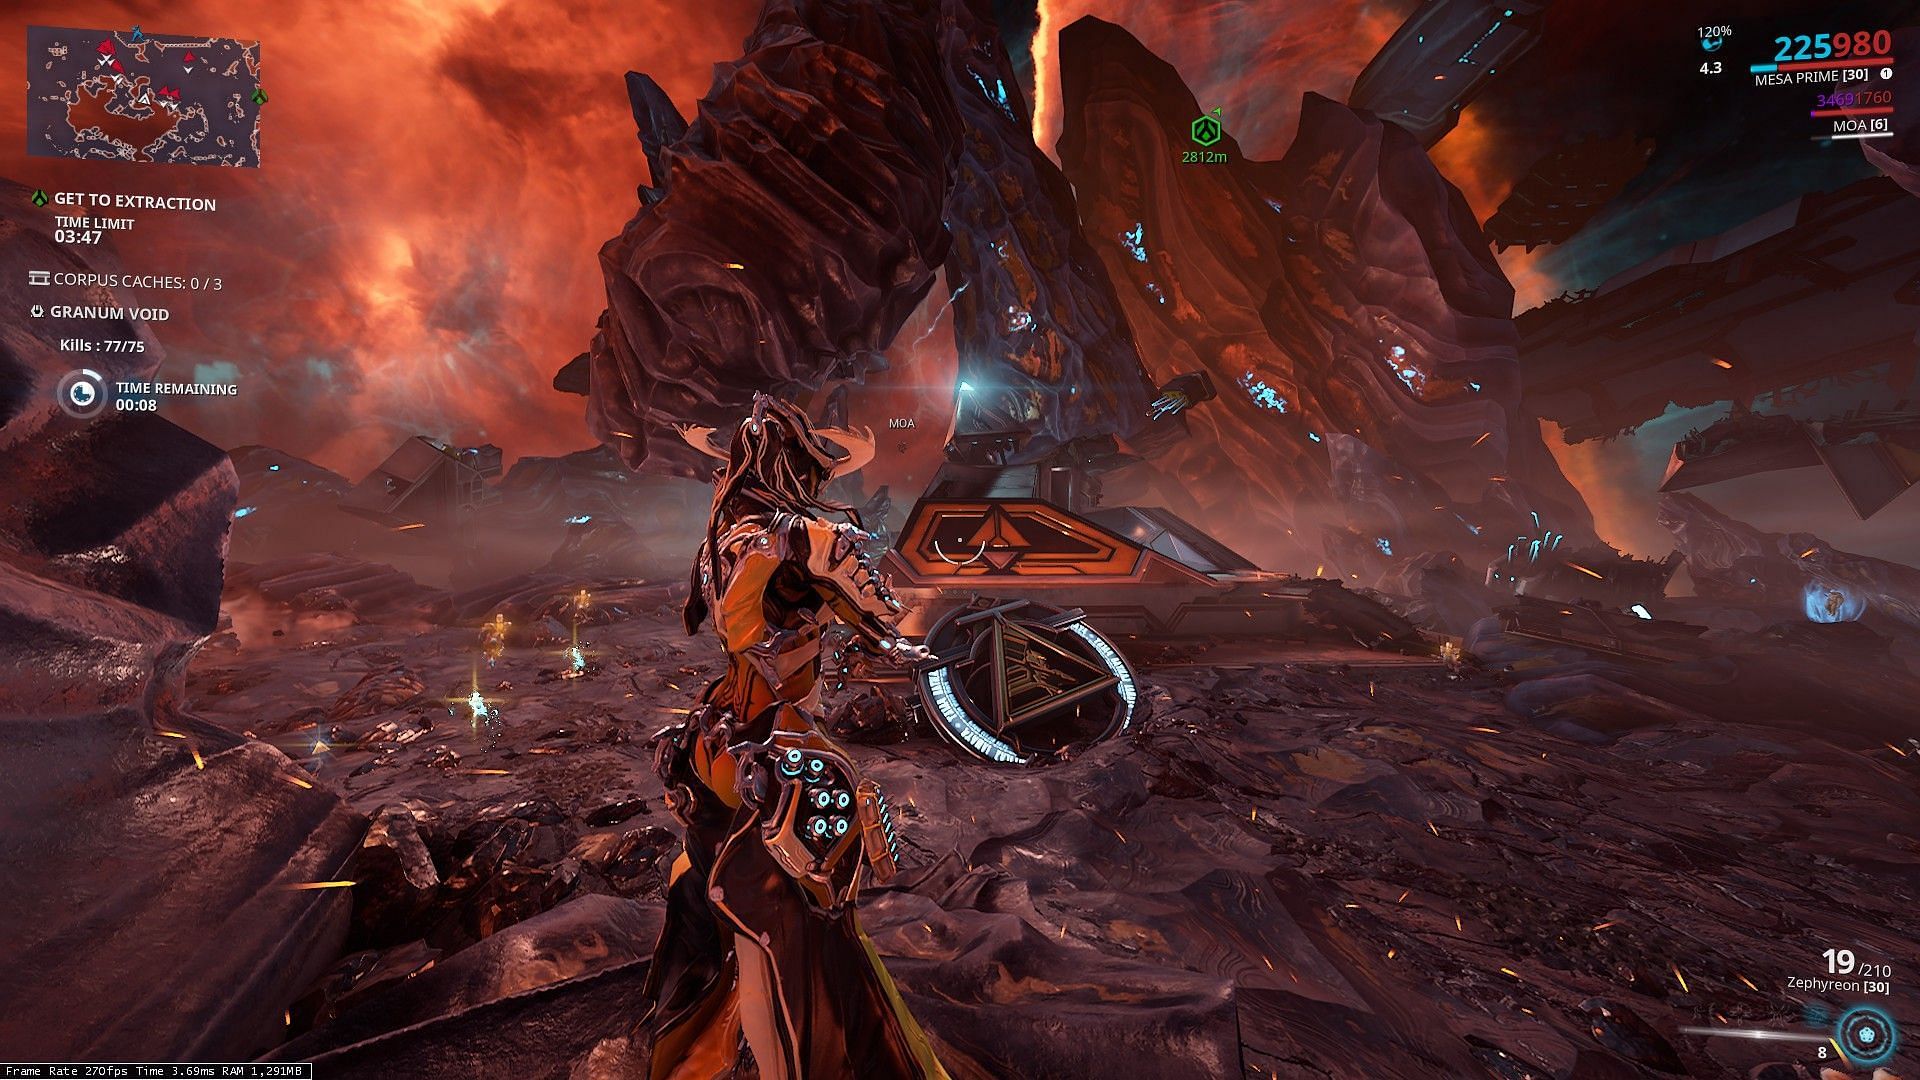 Components for Stropha can be farmed from the Granum Void (Image via Digital Extremes)